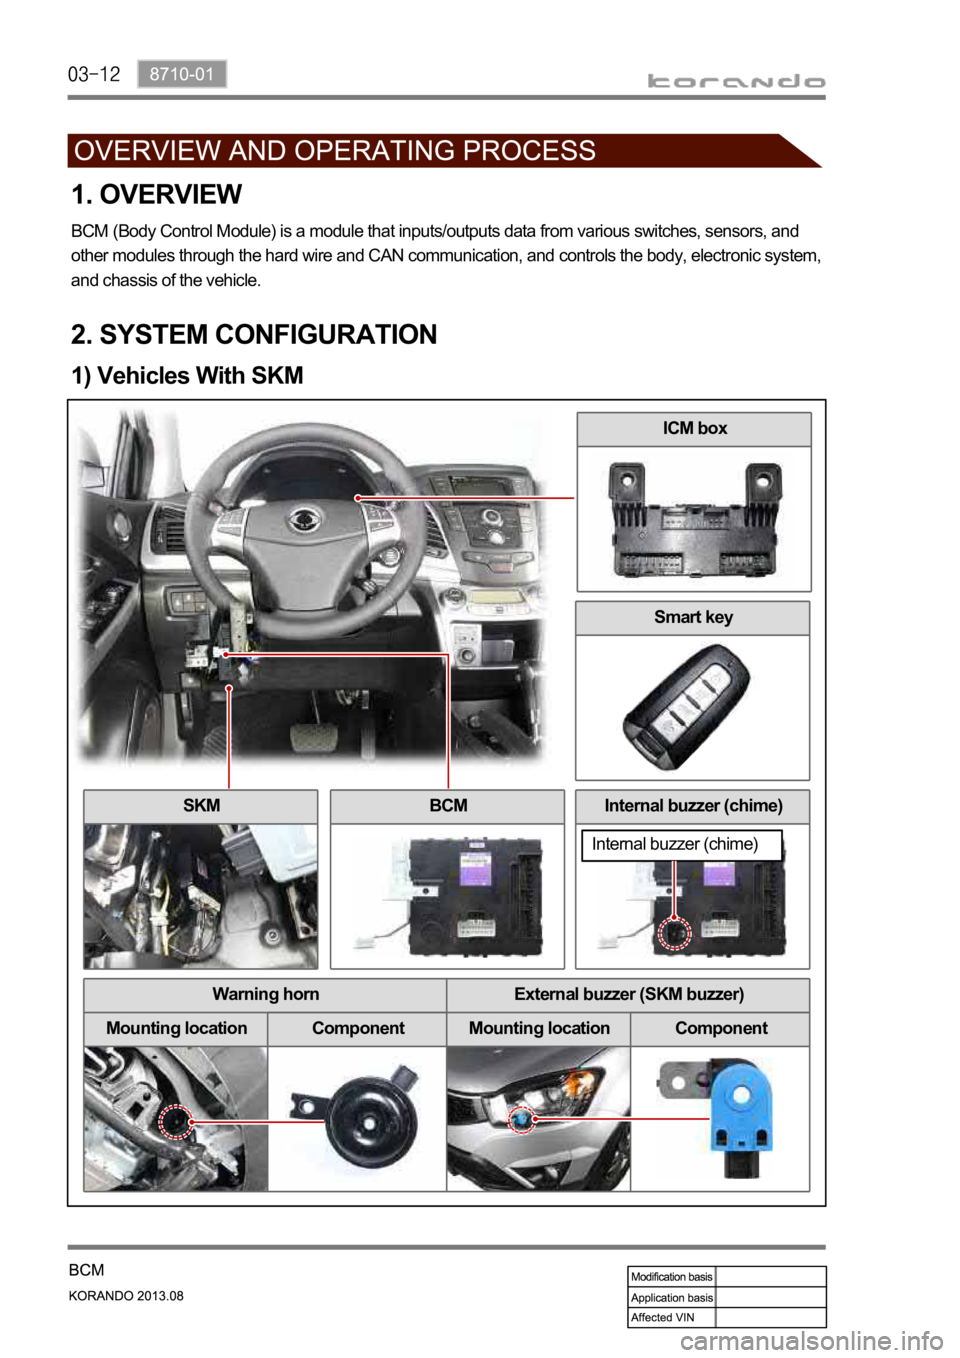 SSANGYONG KORANDO 2013  Service Manual 1. OVERVIEW
BCM (Body Control Module) is a module that inputs/outputs data from various switches, sensors, and 
other modules through the hard wire and CAN communication, and controls the body, electr